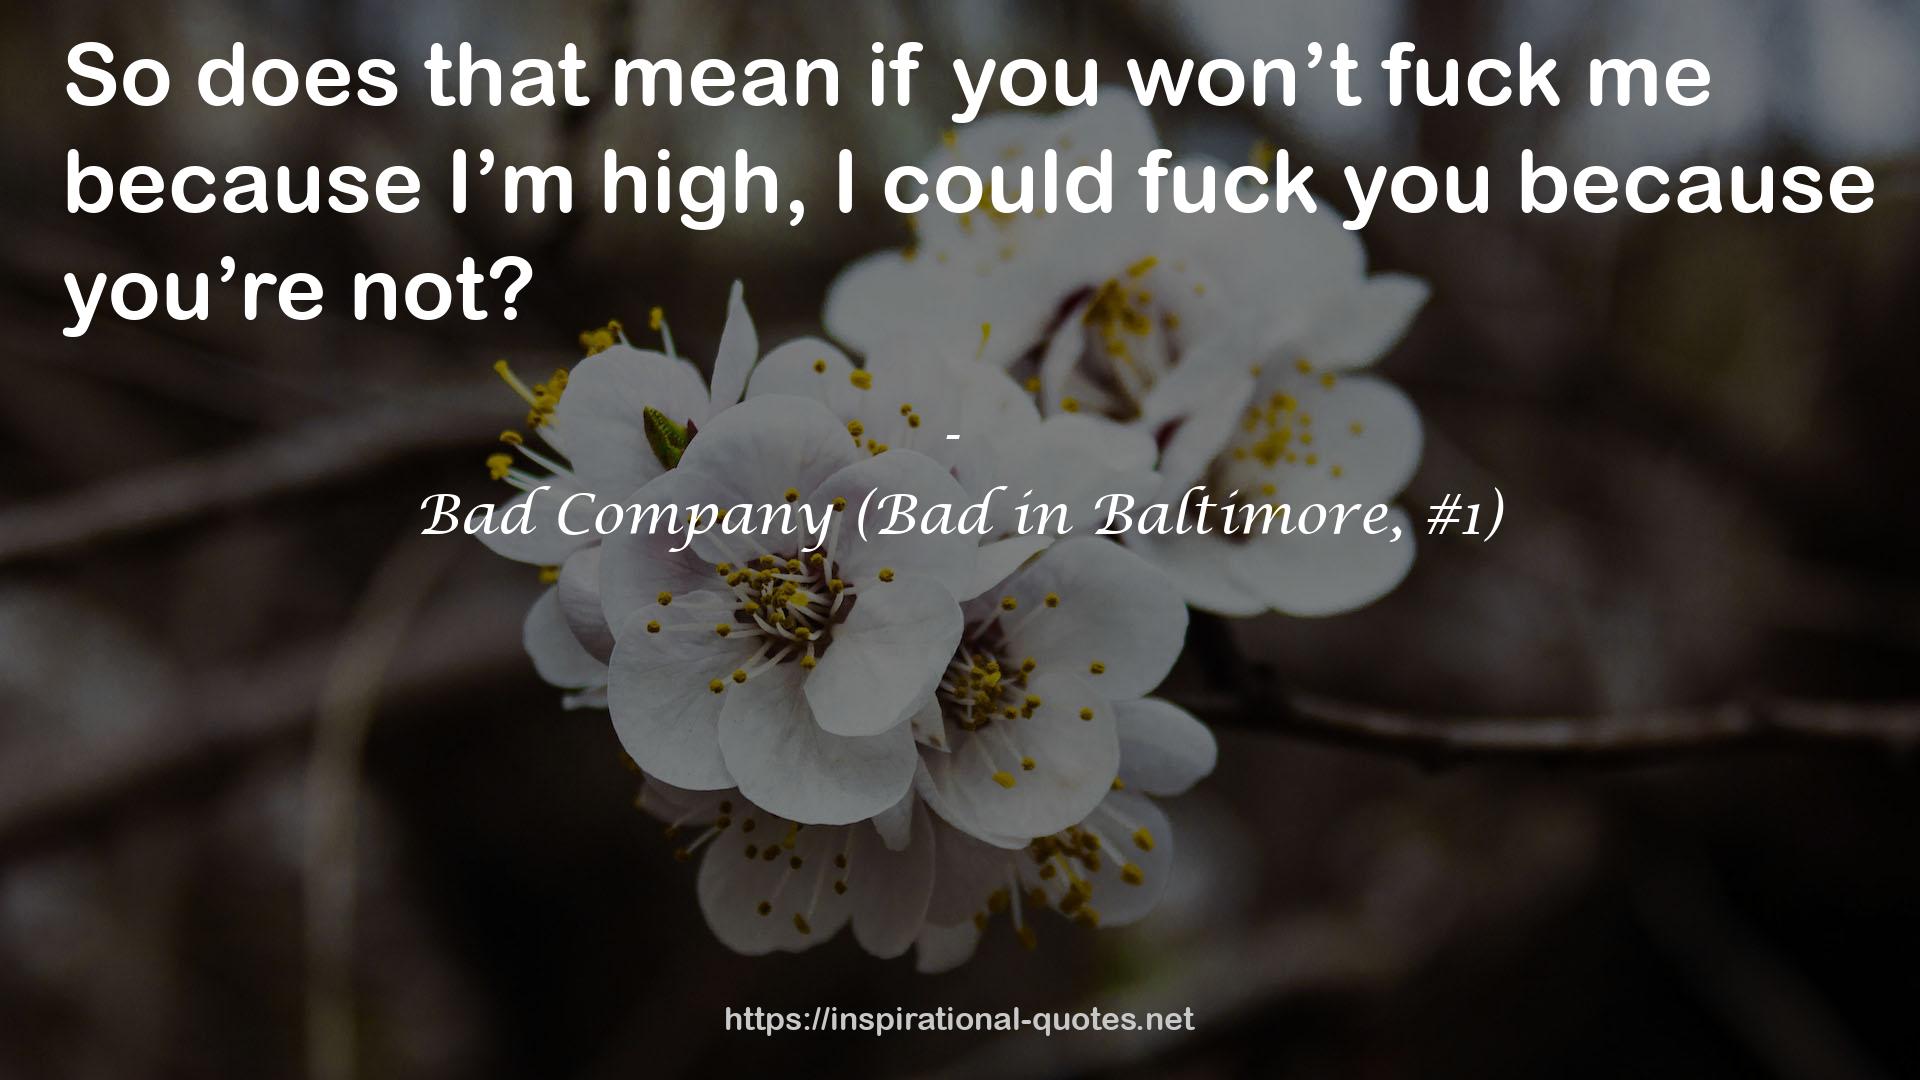 Bad Company (Bad in Baltimore, #1) QUOTES